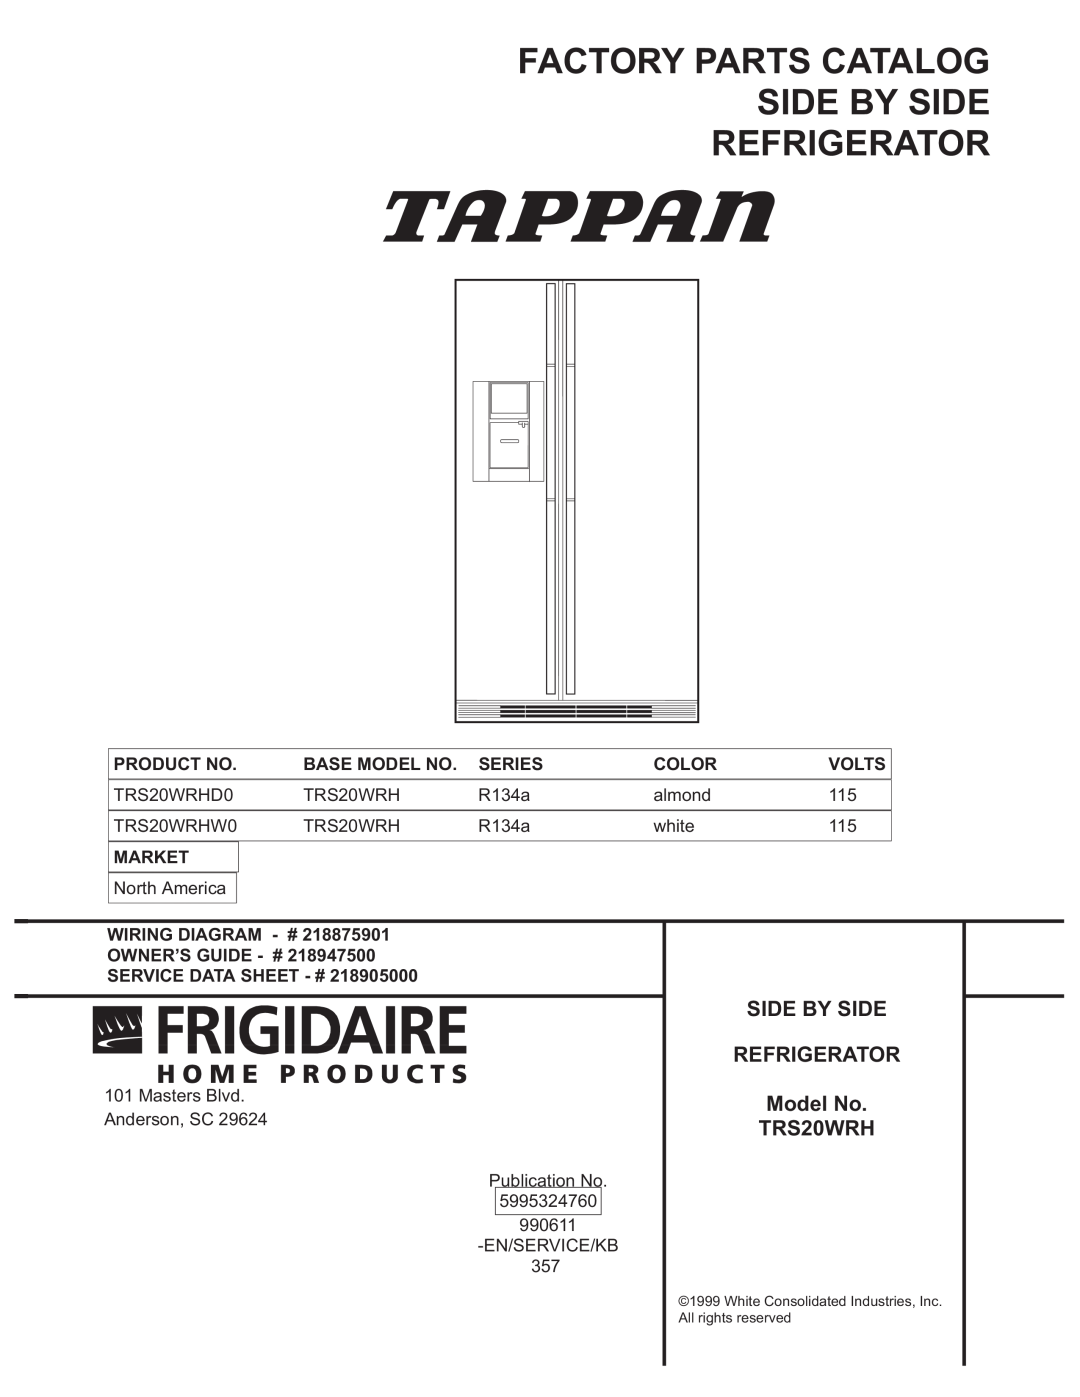 Frigidaire manual Factory Parts Catalog Side By Side Refrigerator, SIDE BY SIDE REFRIGERATOR Model No TRS20WRH, Series 